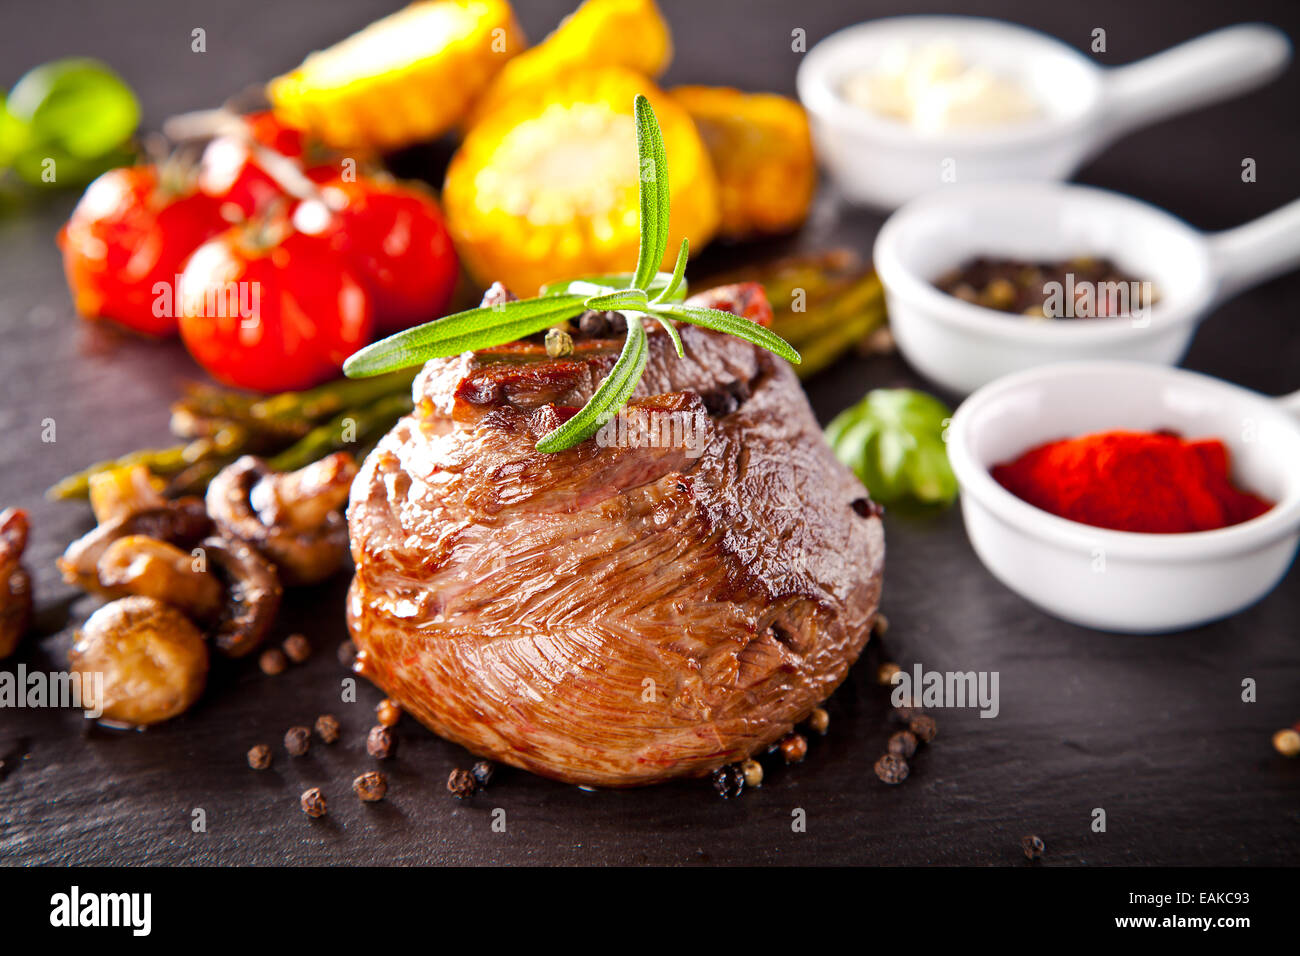 Piece of red meat steak with rosemary served on black stone surface. Stock Photo